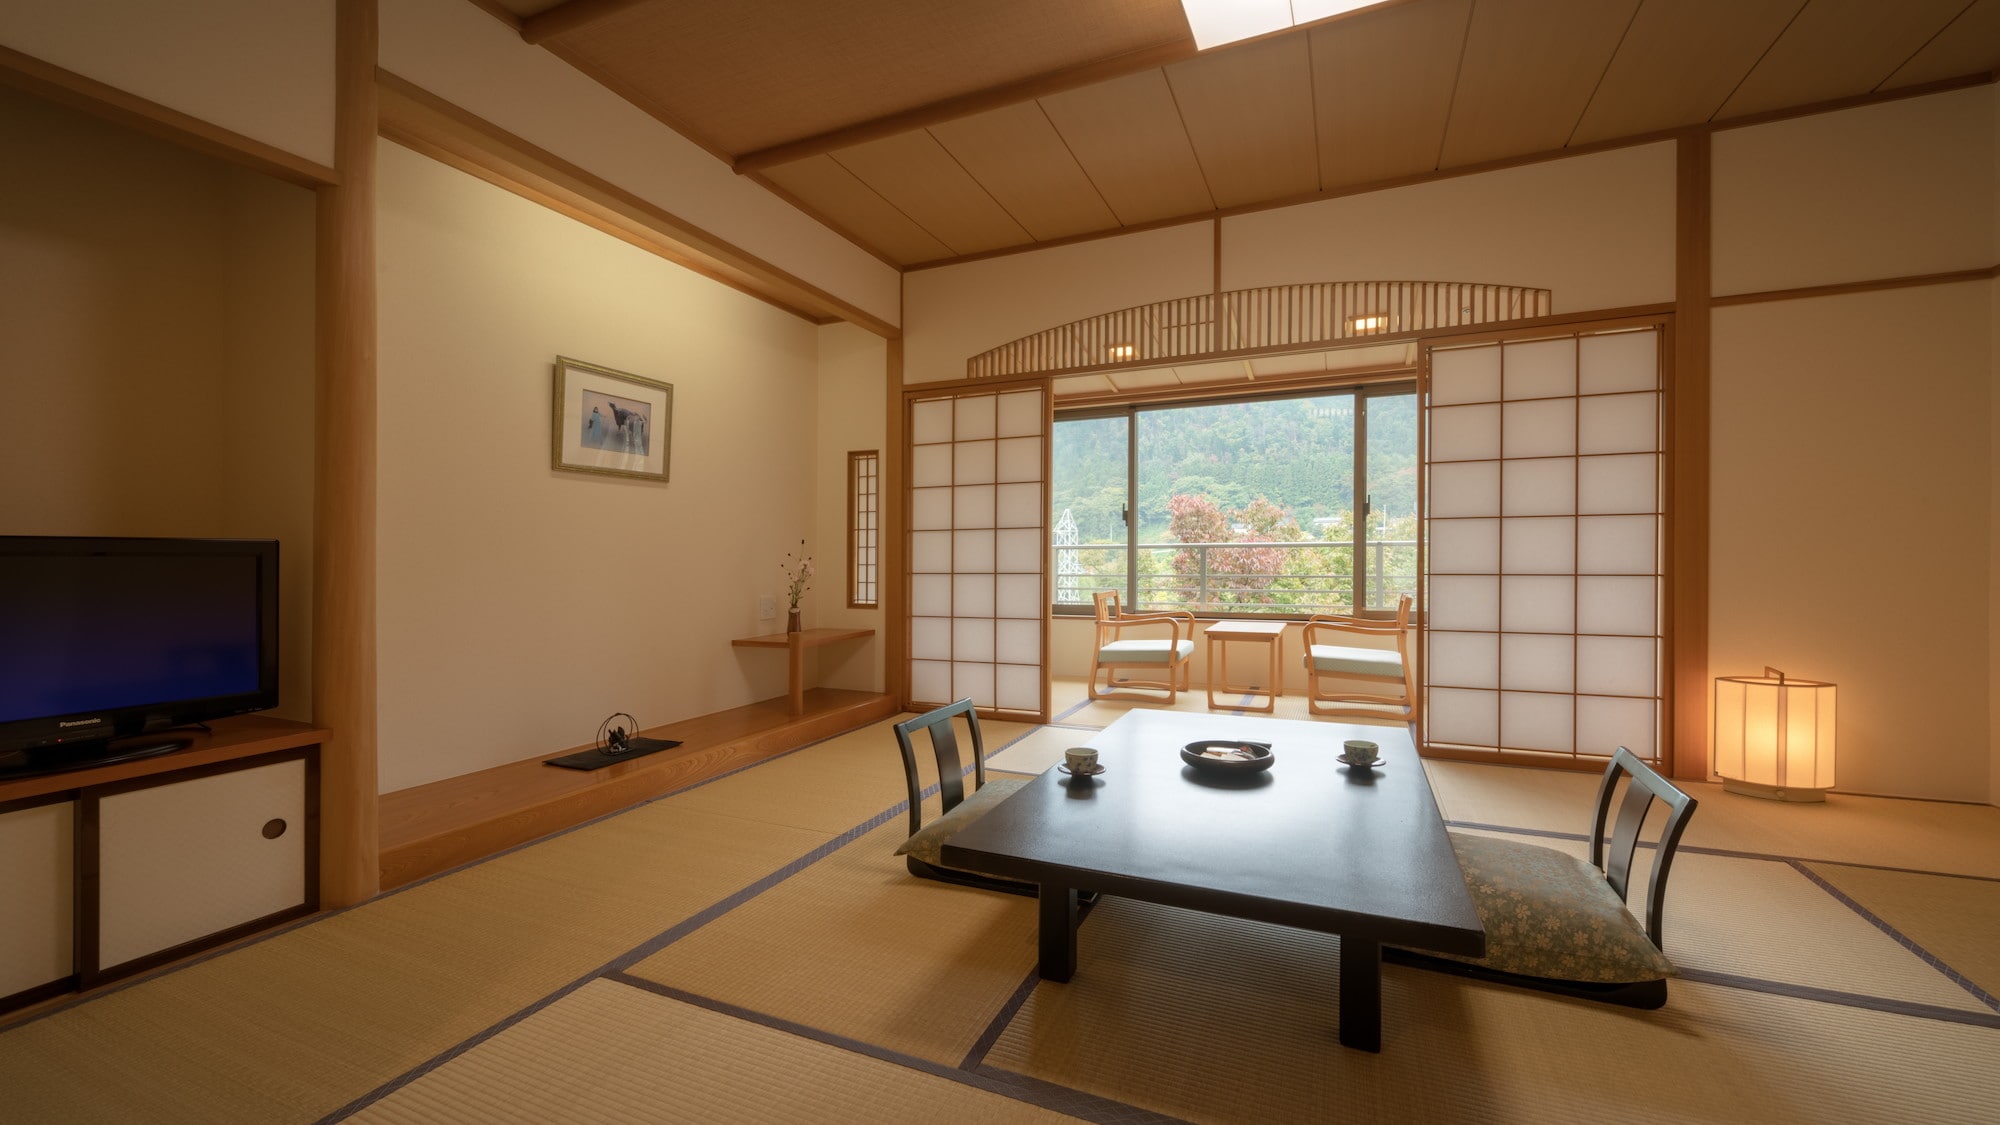 Japanese style room. Please spend a relaxing time surrounded by the scent of rush in the Sukiya-zukuri style of traditional Japanese architecture.